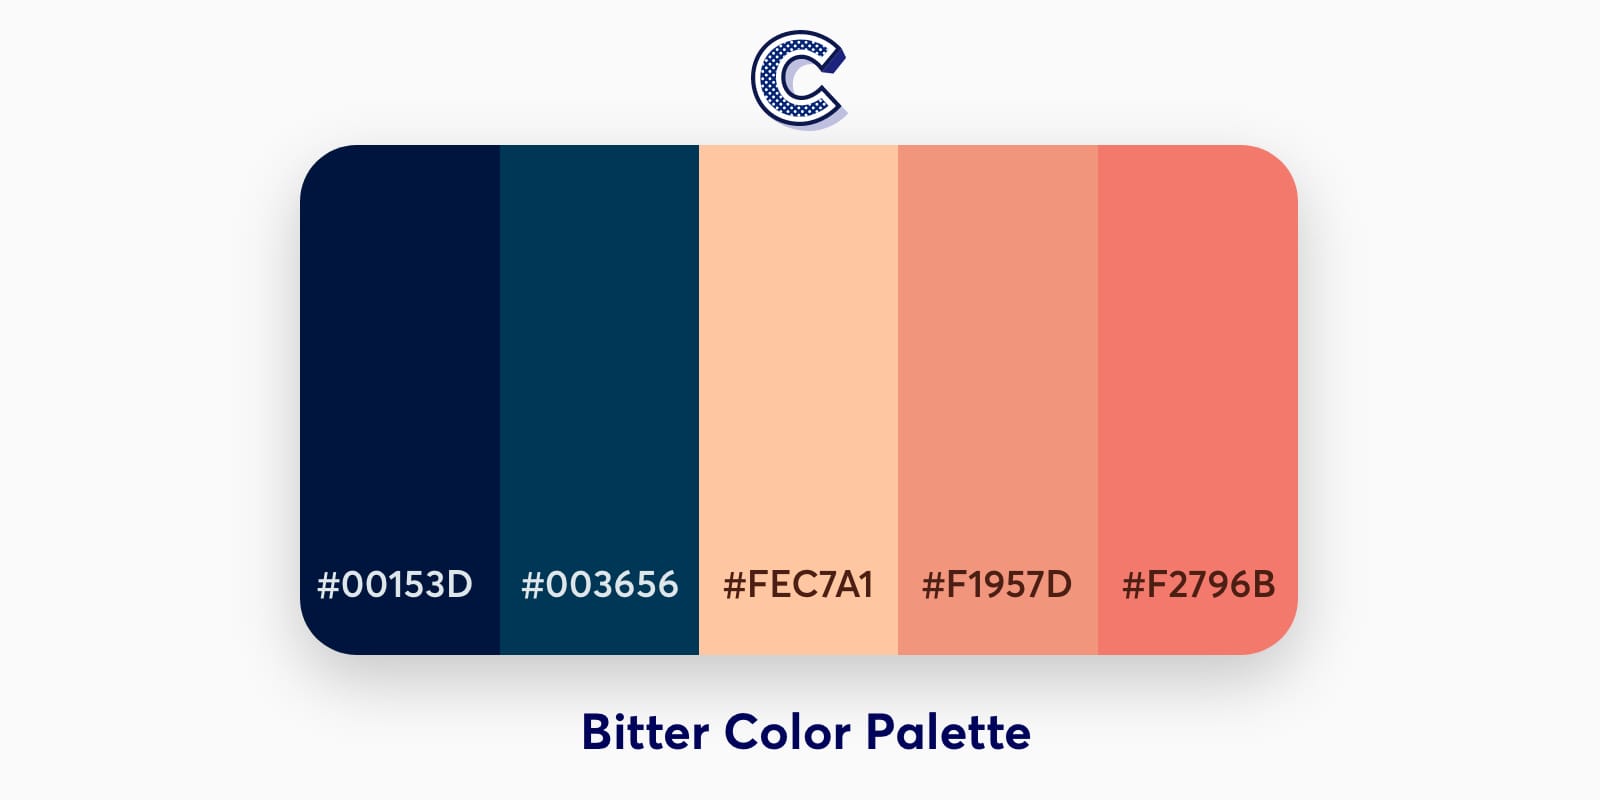 the feautured image of bitter color palette